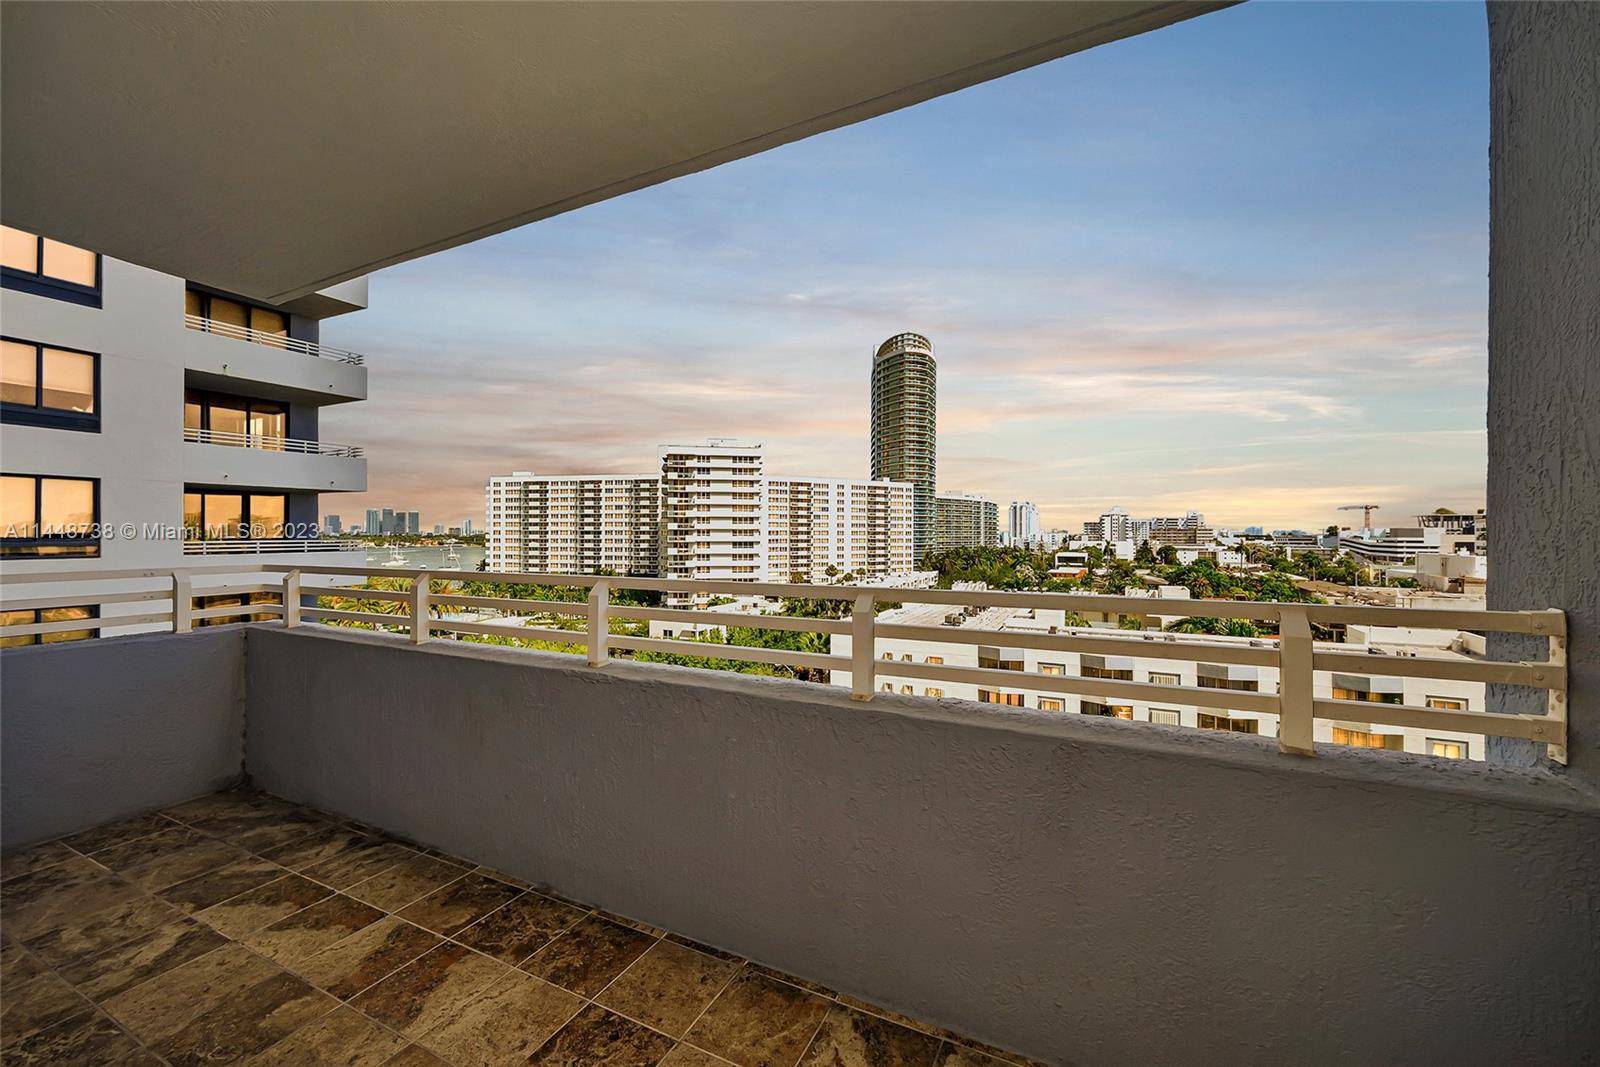 Experience upscale living in an exquisite high rise residence nestled within the vibrant heart of South Beach, in the renowned West Avenue neighborhood overlooking the picturesque Biscayne Bay.